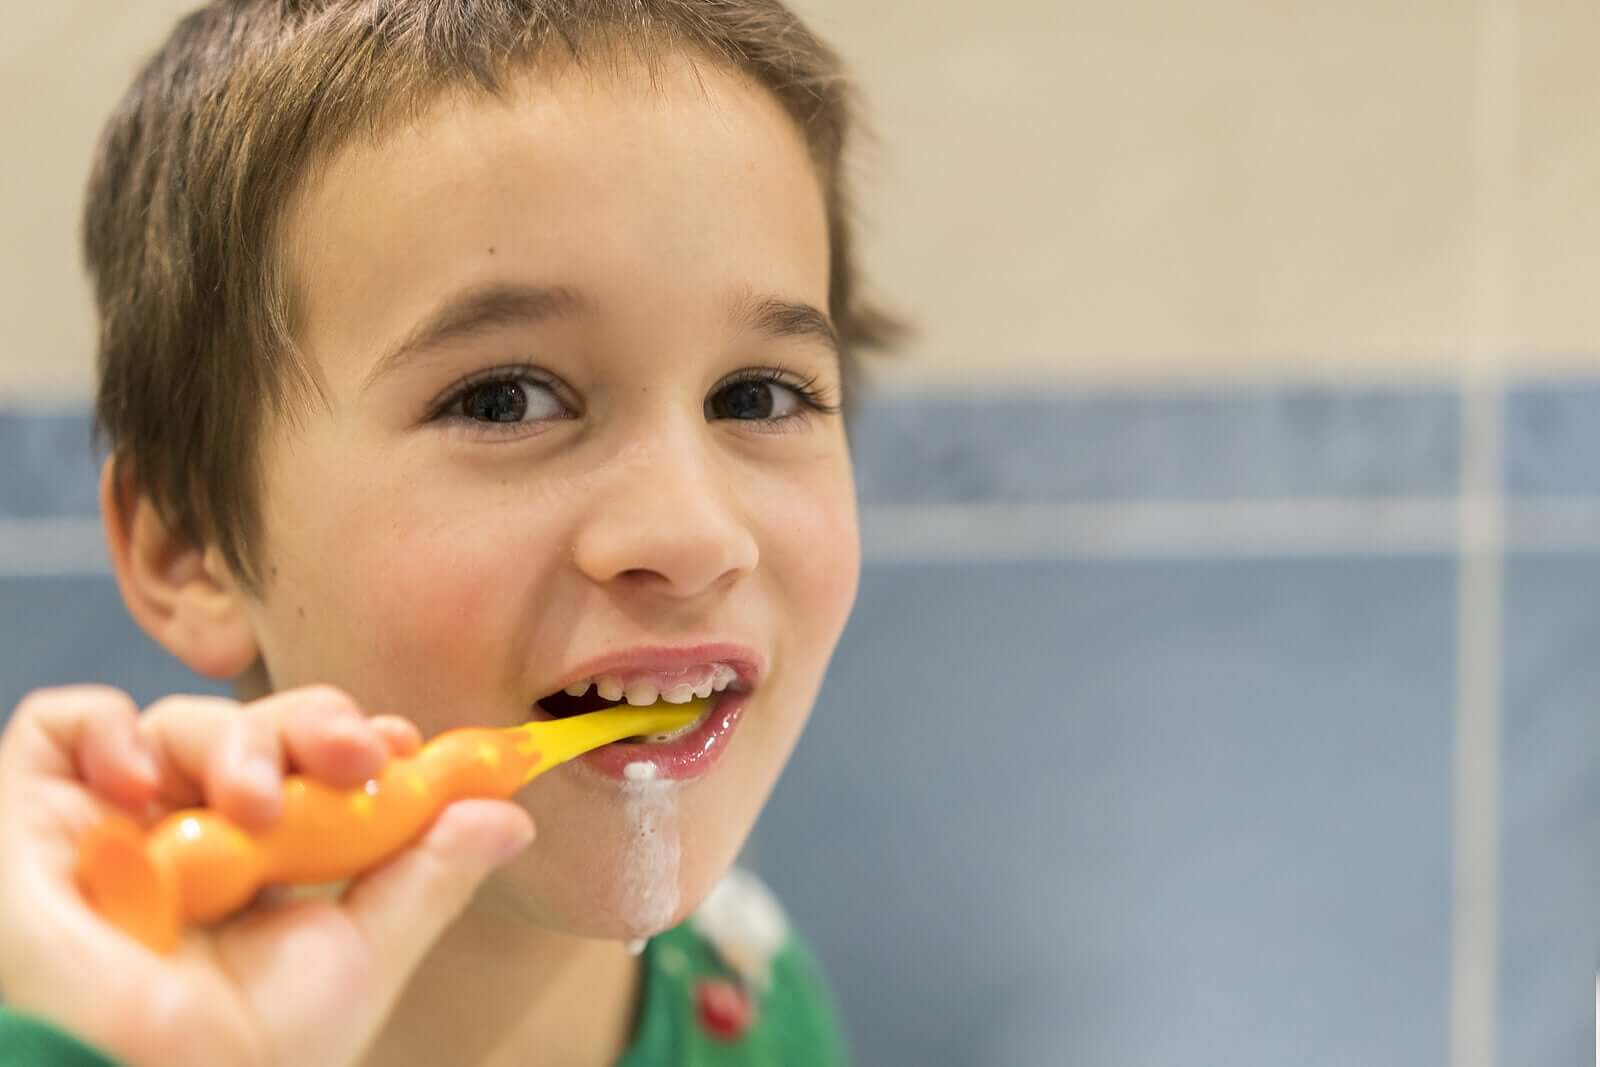 Is Fluoride Good or Bad for Kids?